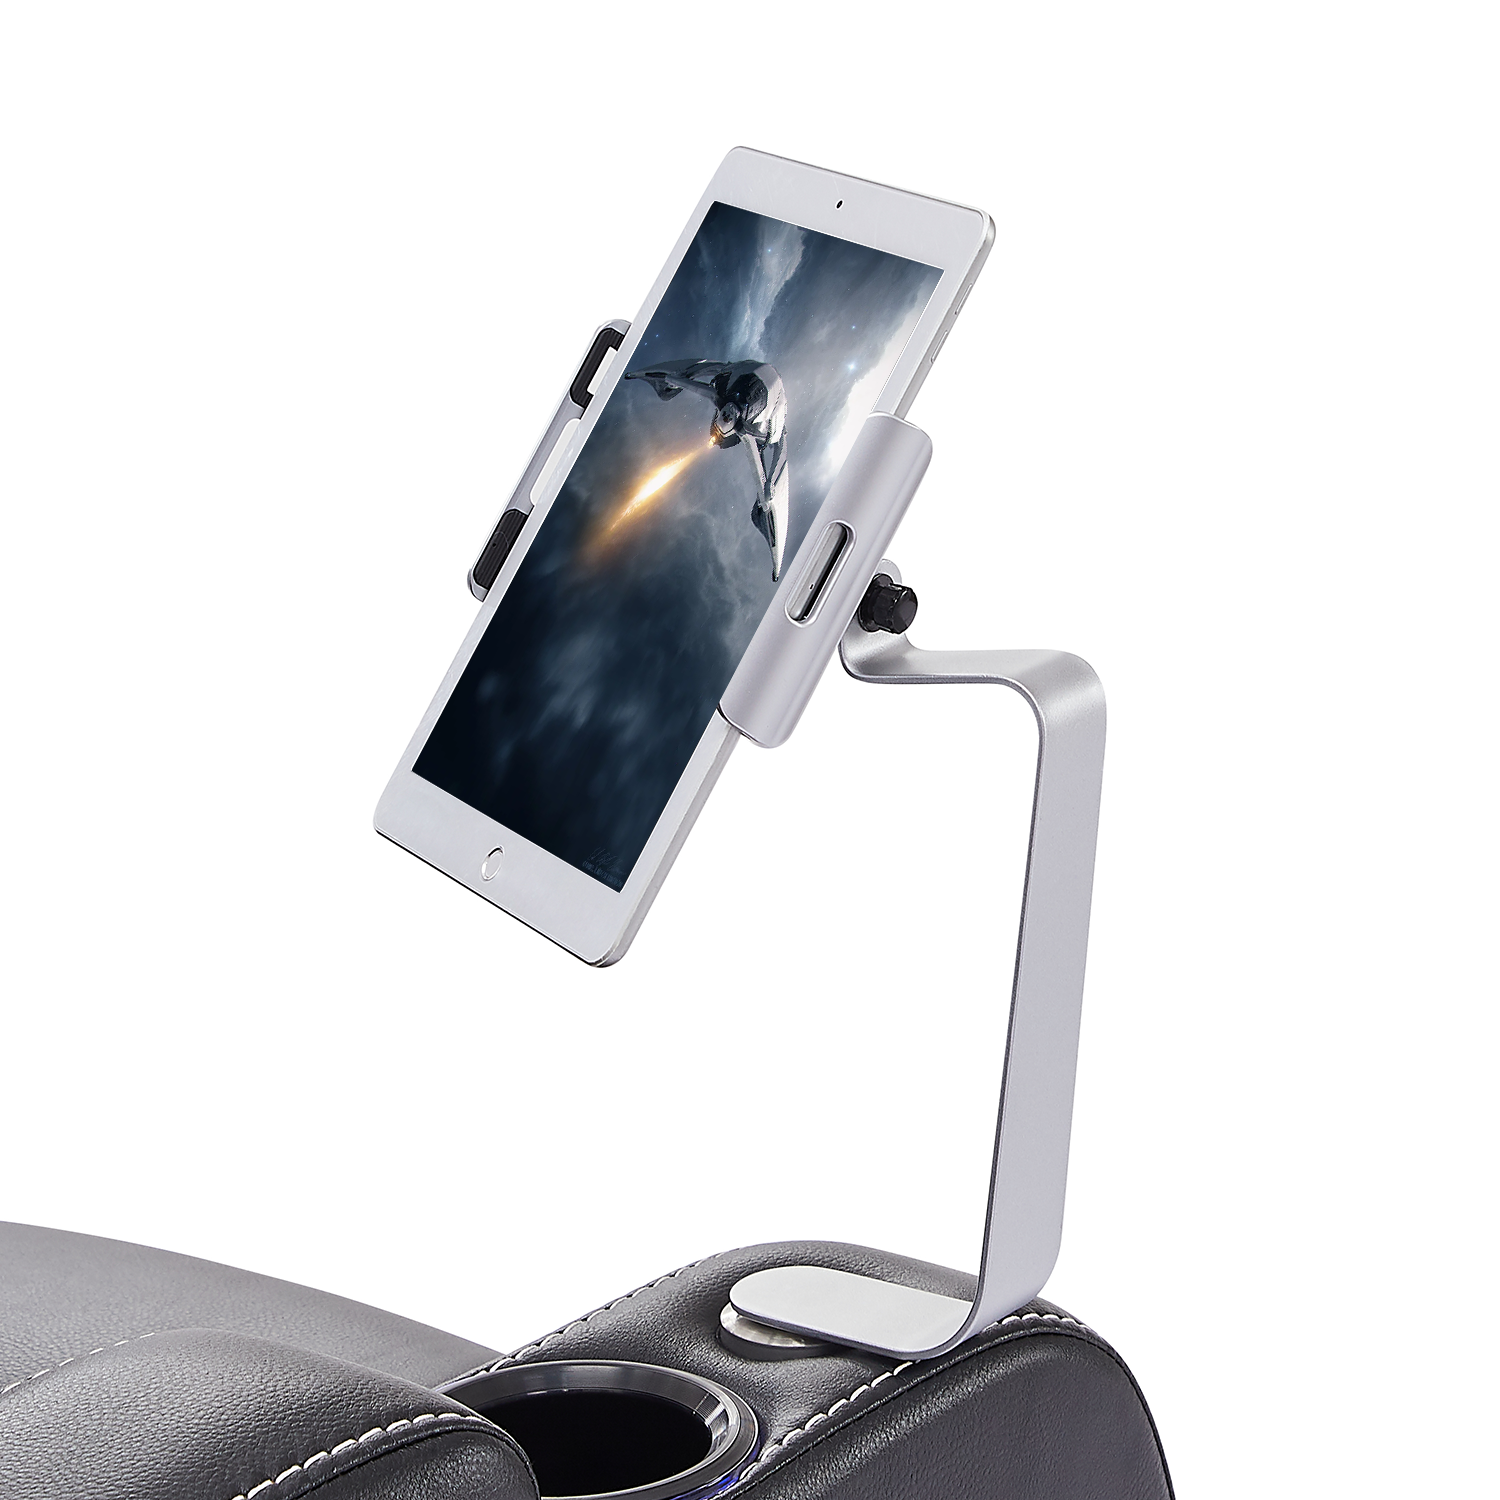 Weilianda Home Theater Seating Series Swivel Tablet and Cell Phone Holder,Silver